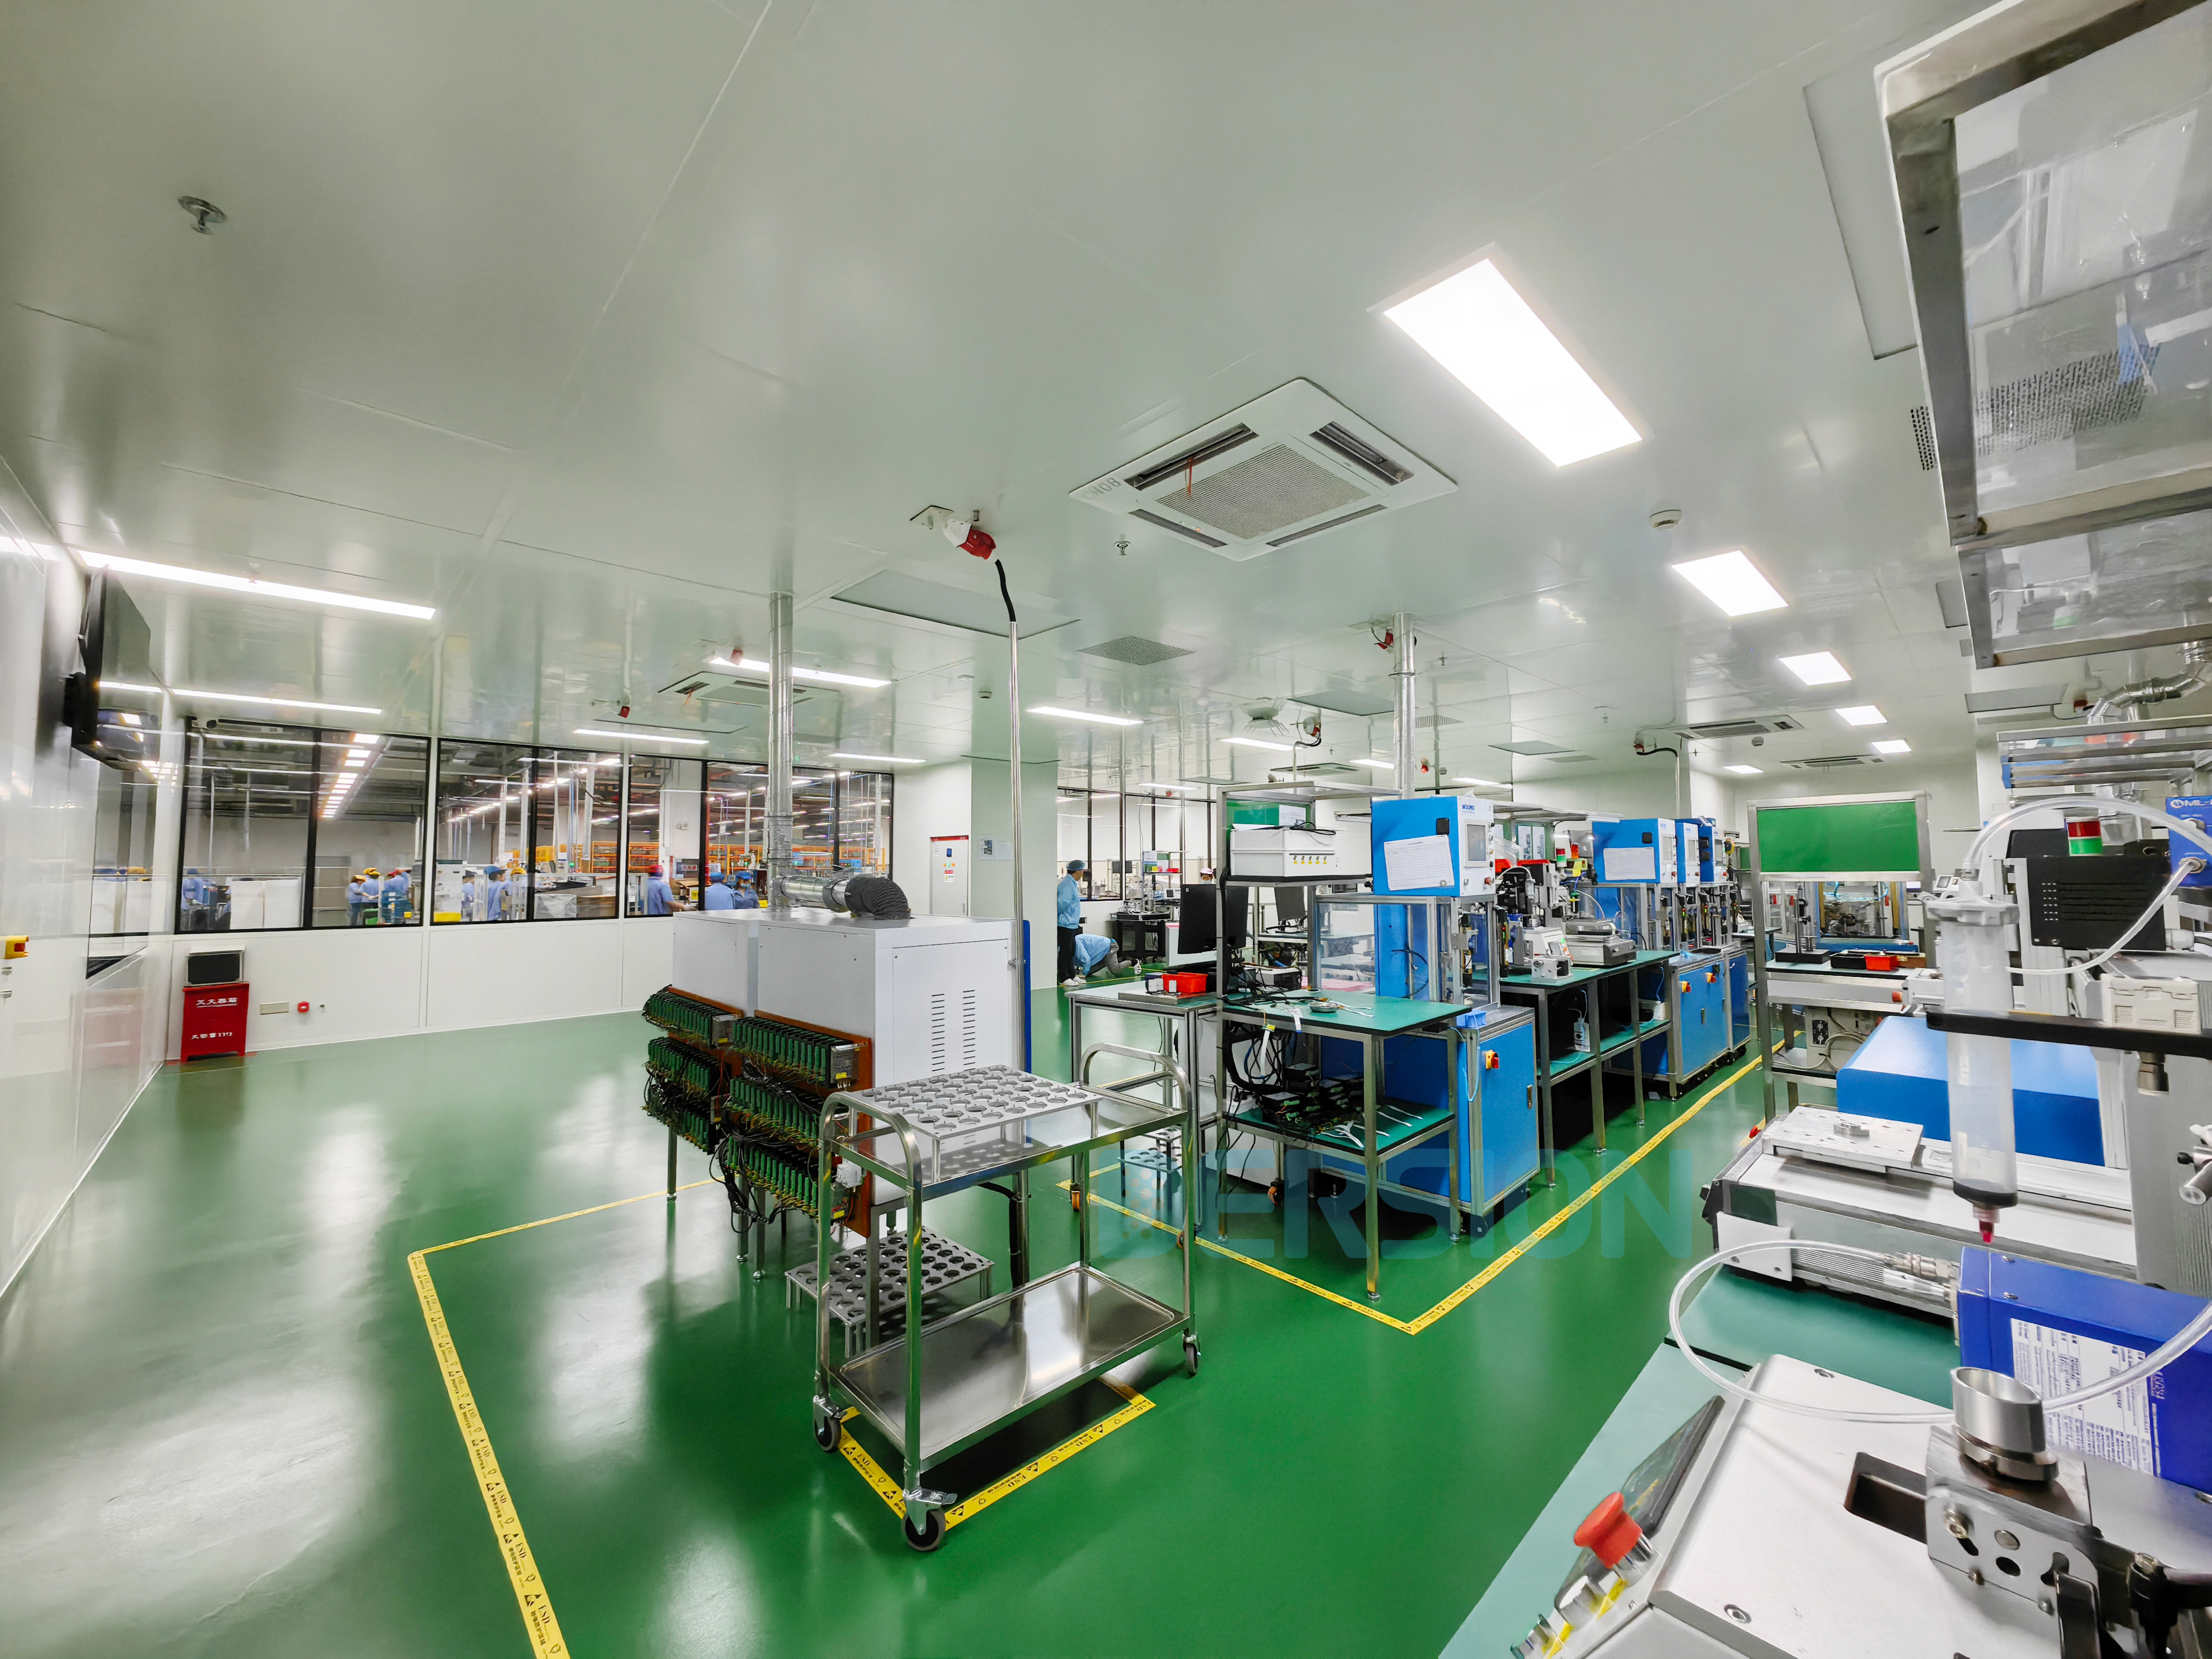 The key points and design solutions of injection molding clean room construction